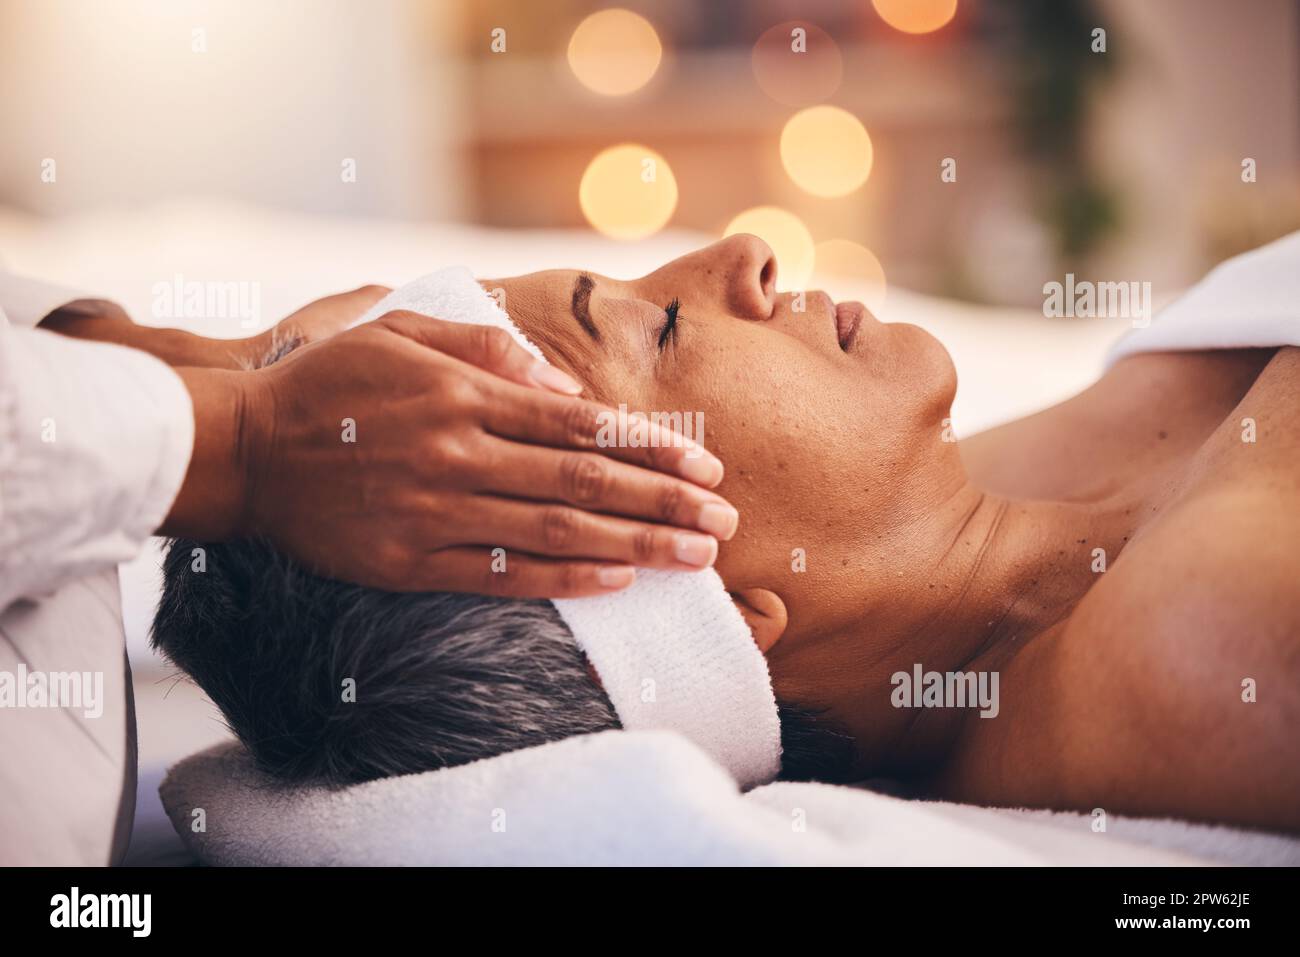 Wellness, health and massage, senior woman at a spa getting luxury beauty therapy and facial image